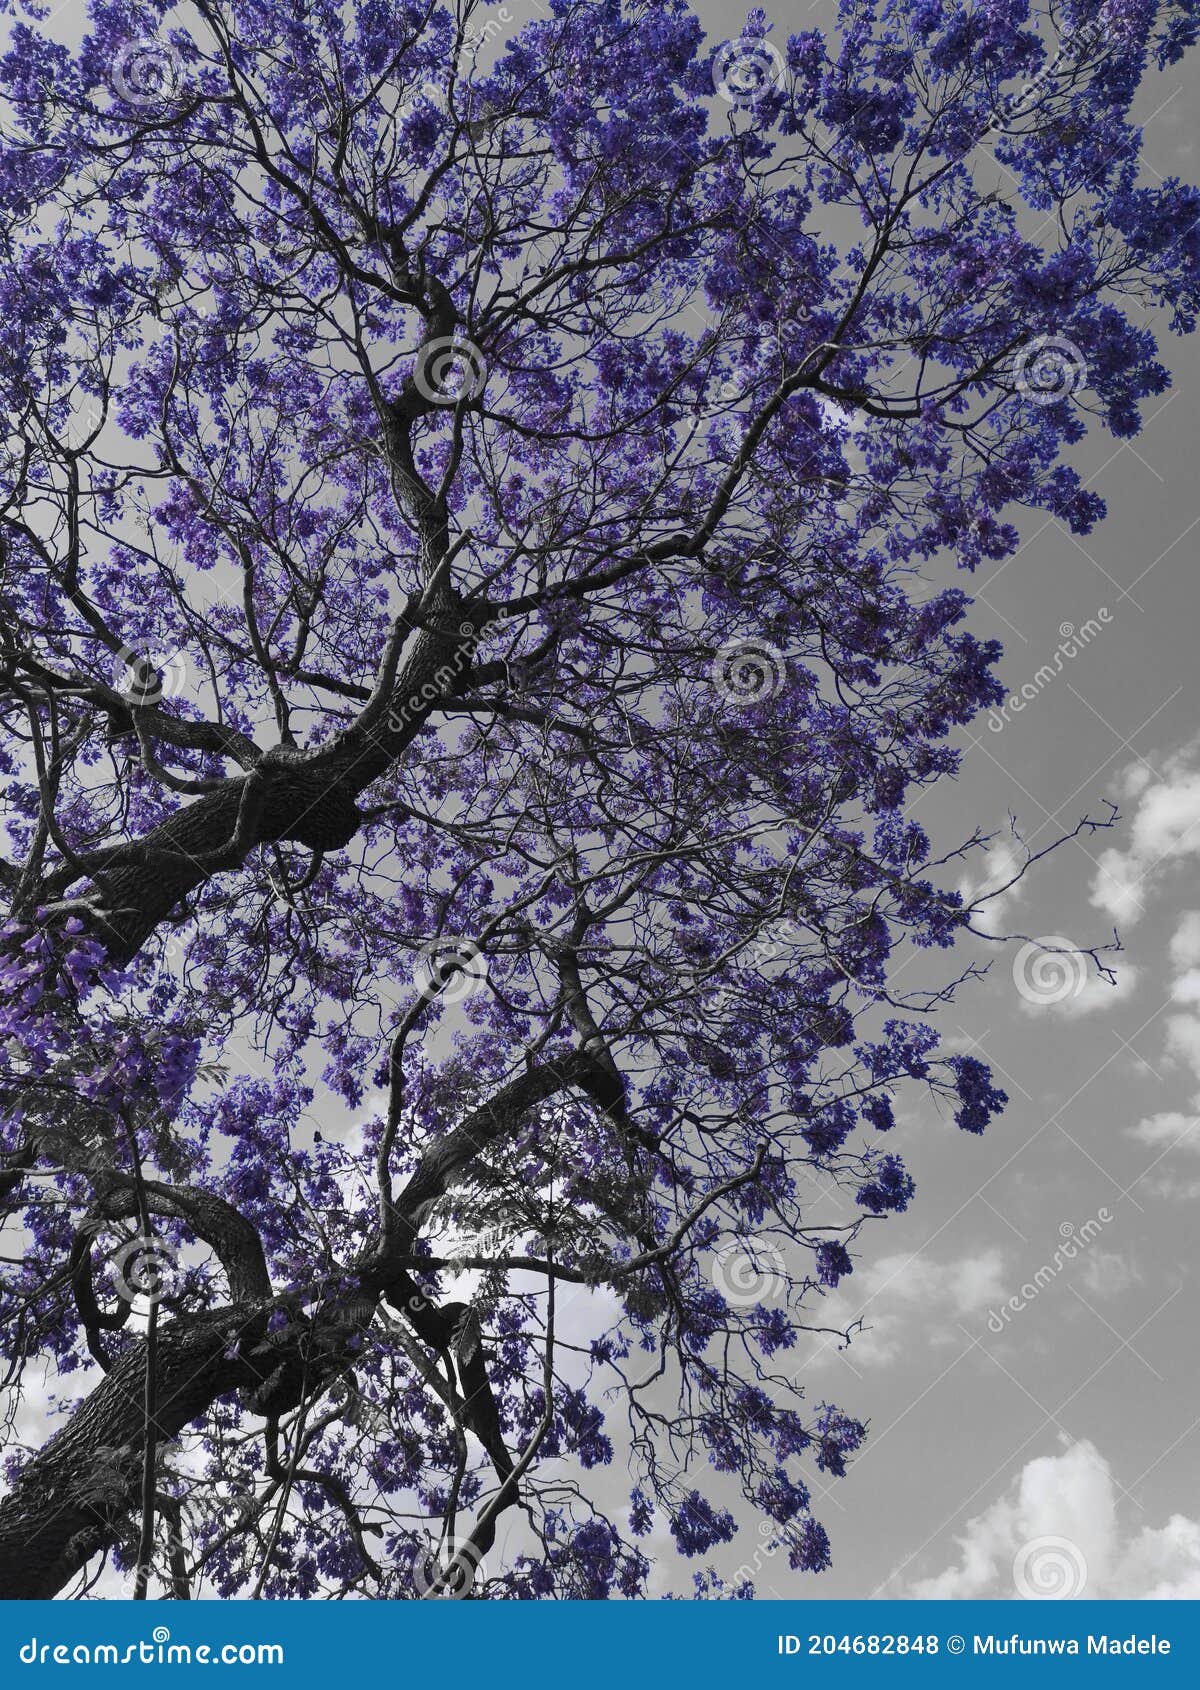 it's the colour of the jacaranda that just brightens everything up